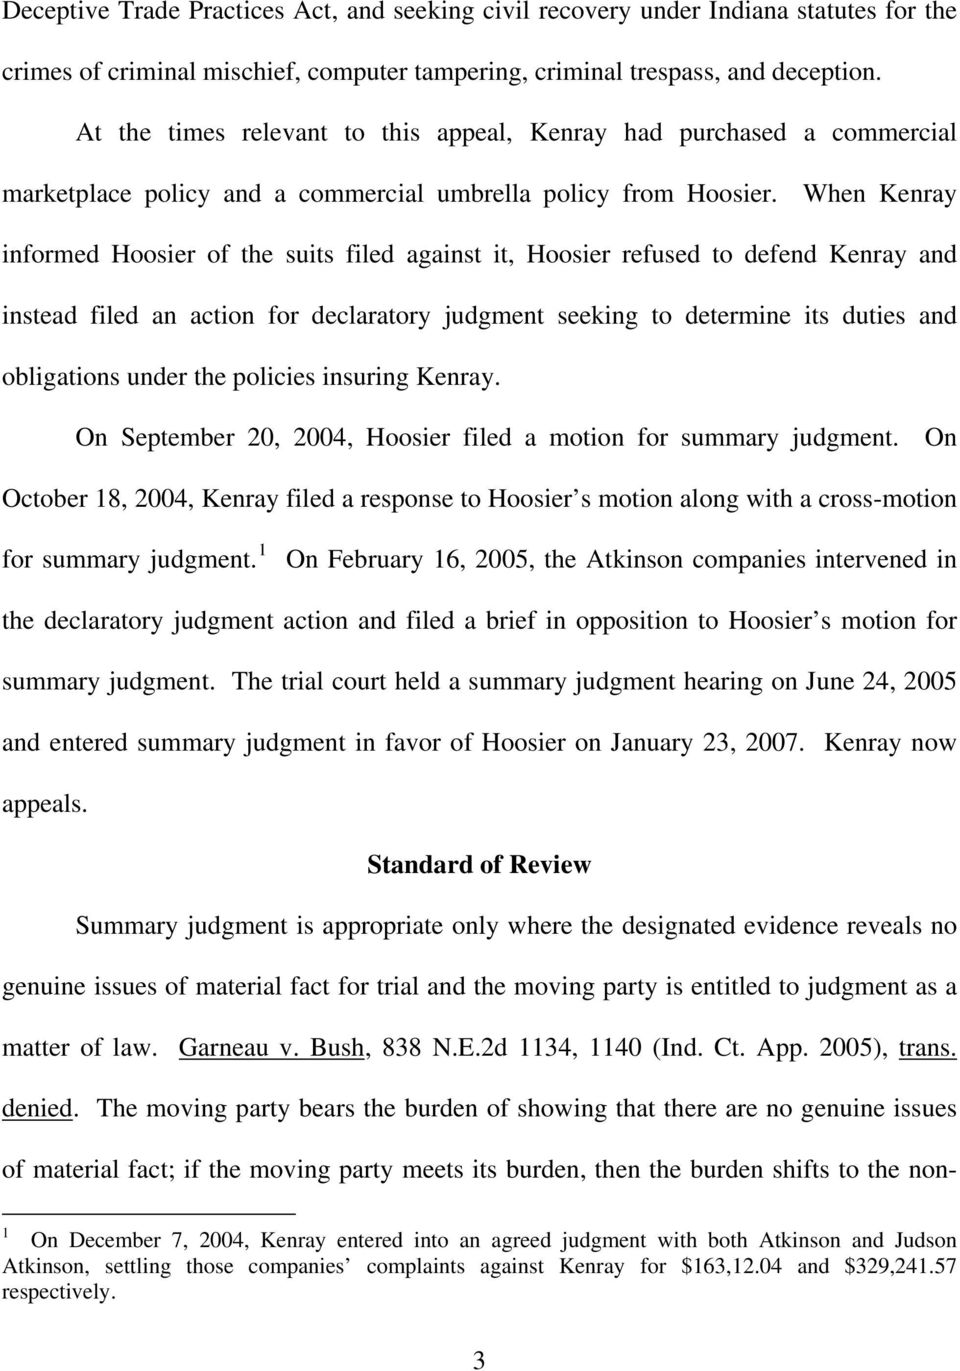 When Kenray informed Hoosier of the suits filed against it, Hoosier refused to defend Kenray and instead filed an action for declaratory judgment seeking to determine its duties and obligations under